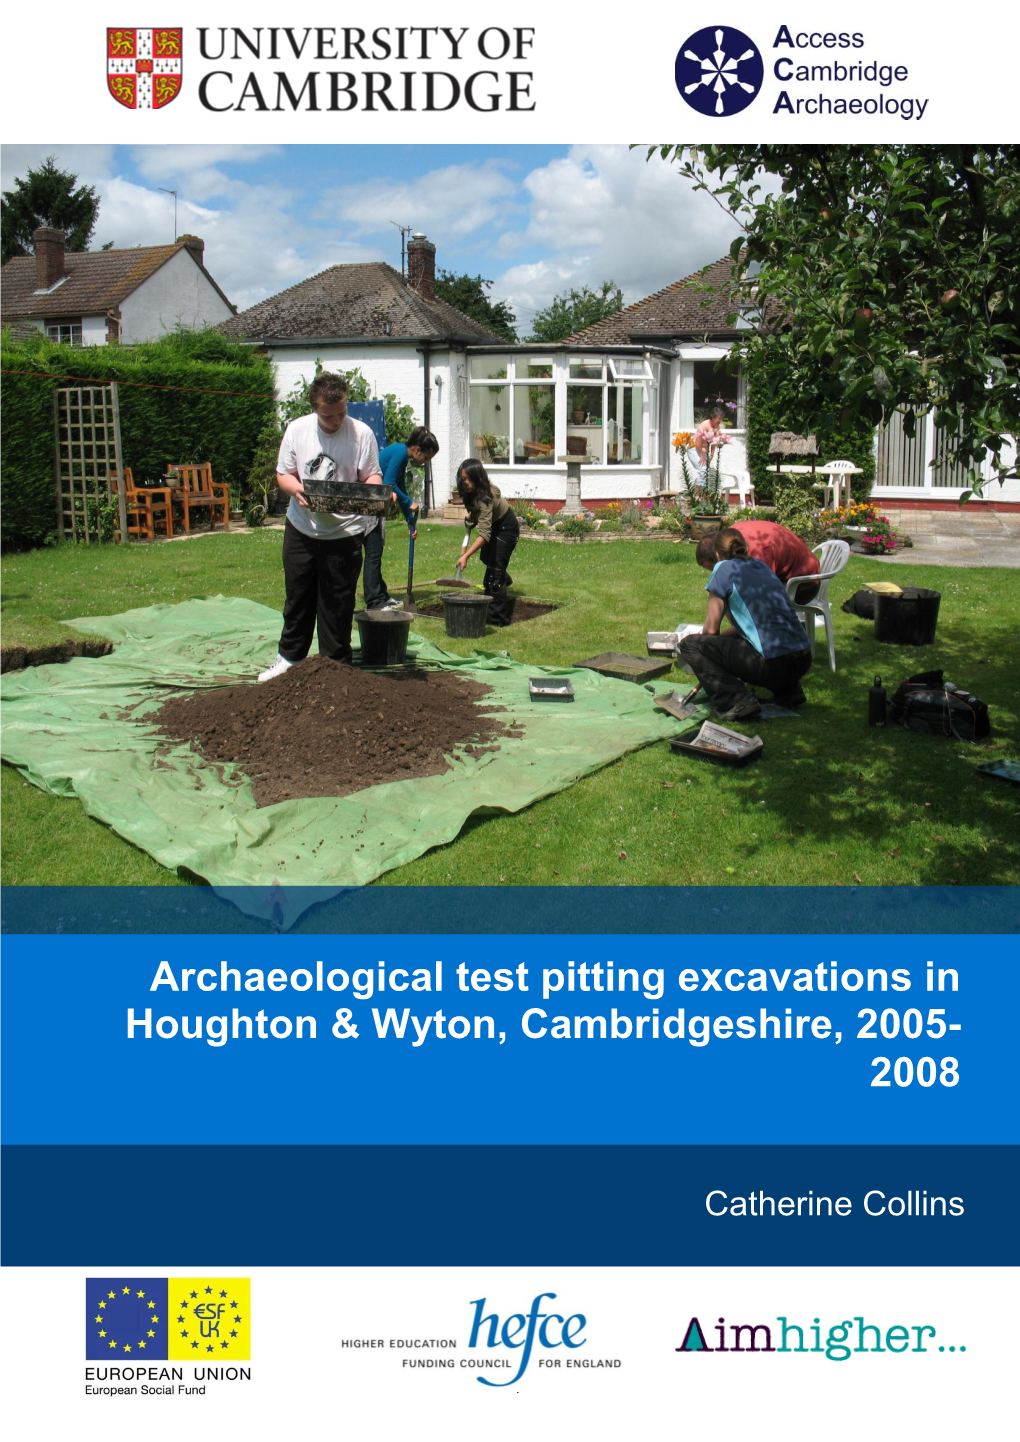 Archaeological Test Pitting Excavations in Houghton & Wyton